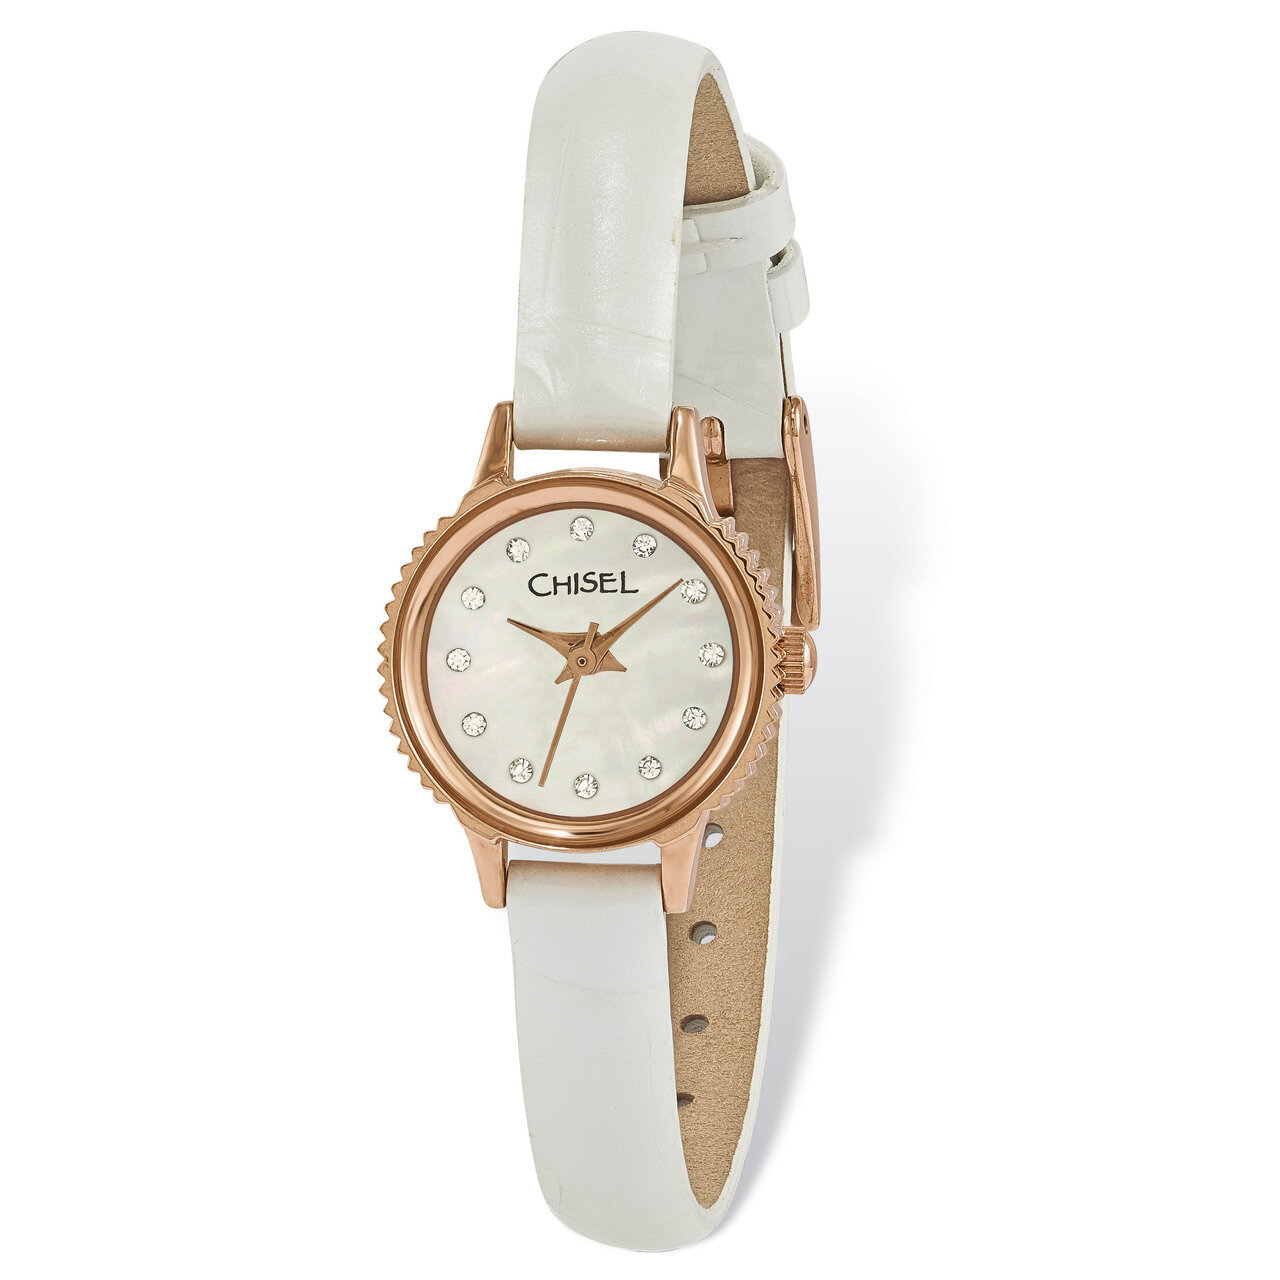 Chisel Rose IP-plated Stainless Steel White Leather Watch Strap Ladies TPW94